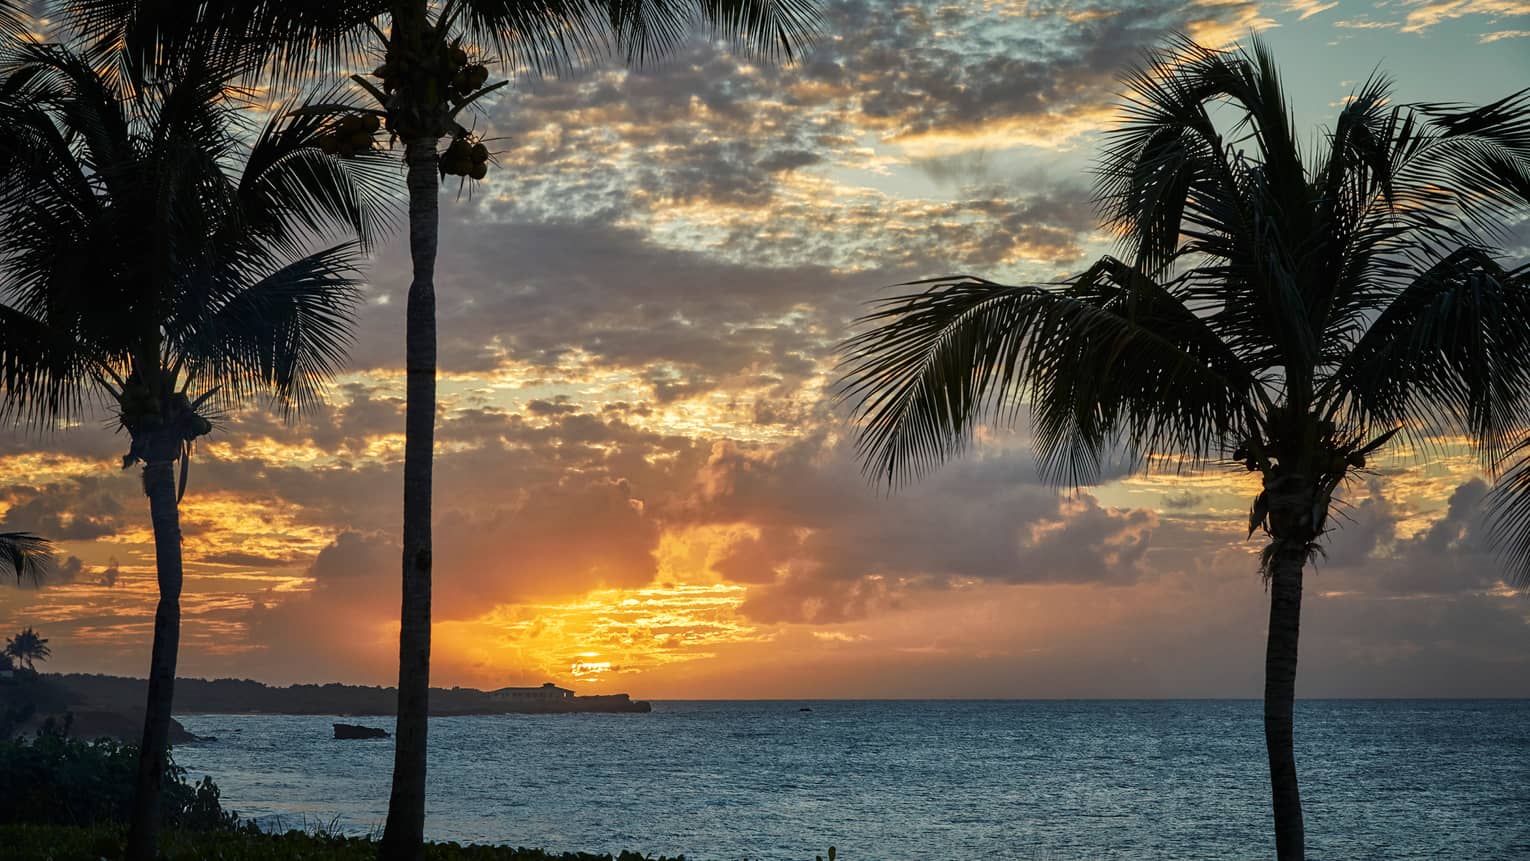 Silhouette of three tall palm trees against sunset, ocean